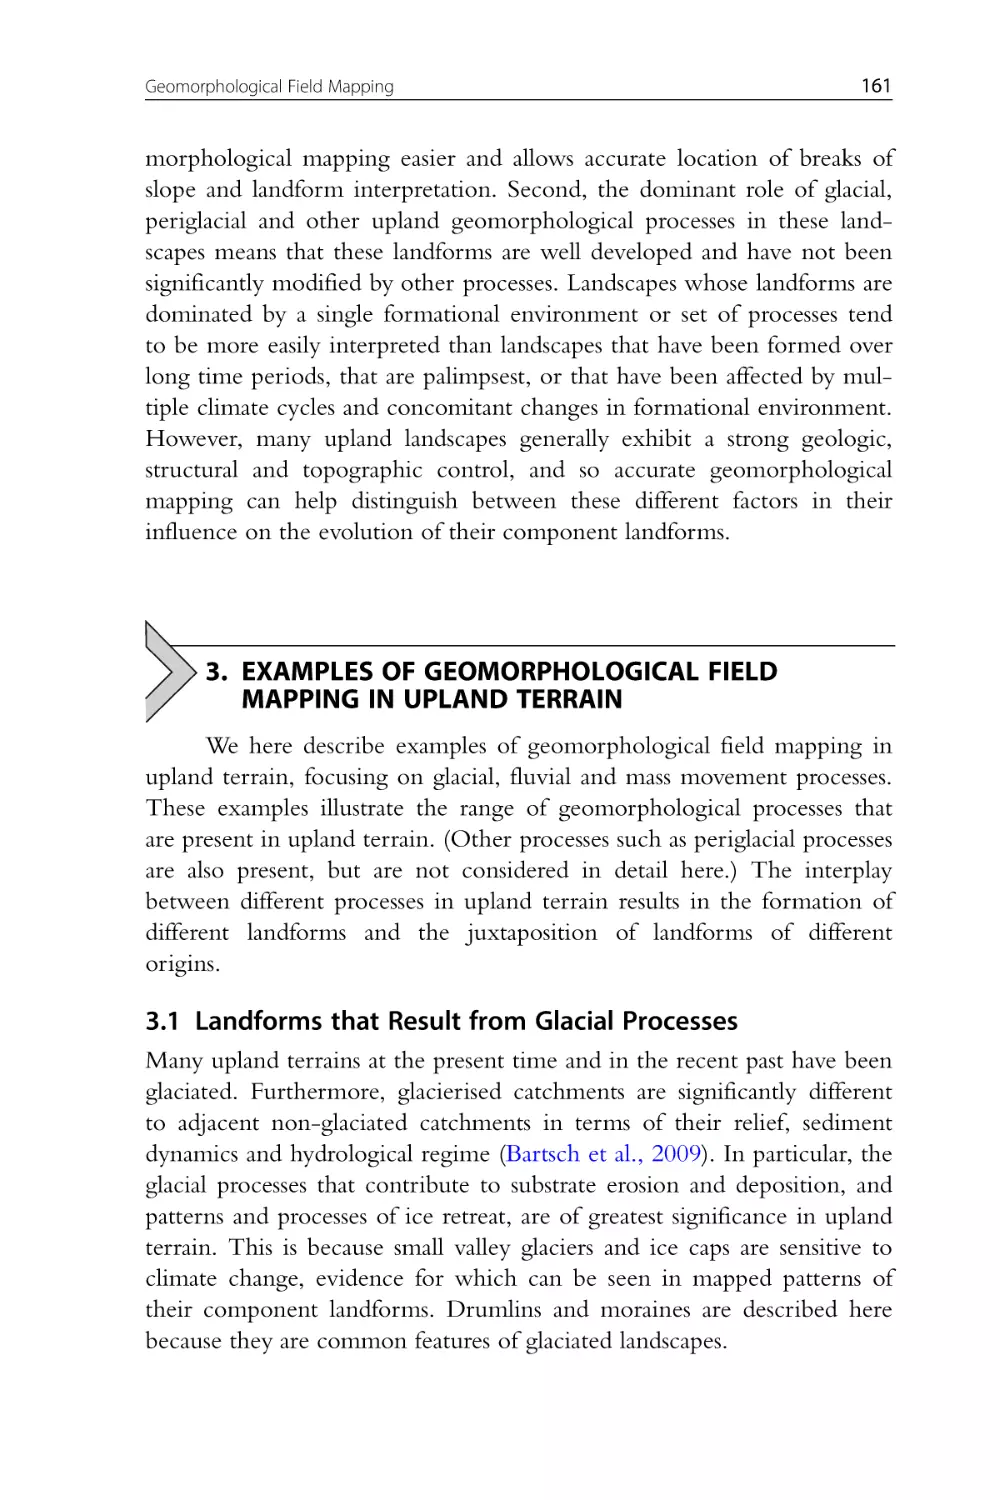 3. Examples of Geomorphological Field Mapping in Upland Terrain
3.1 Landforms that Result from Glacial Processes